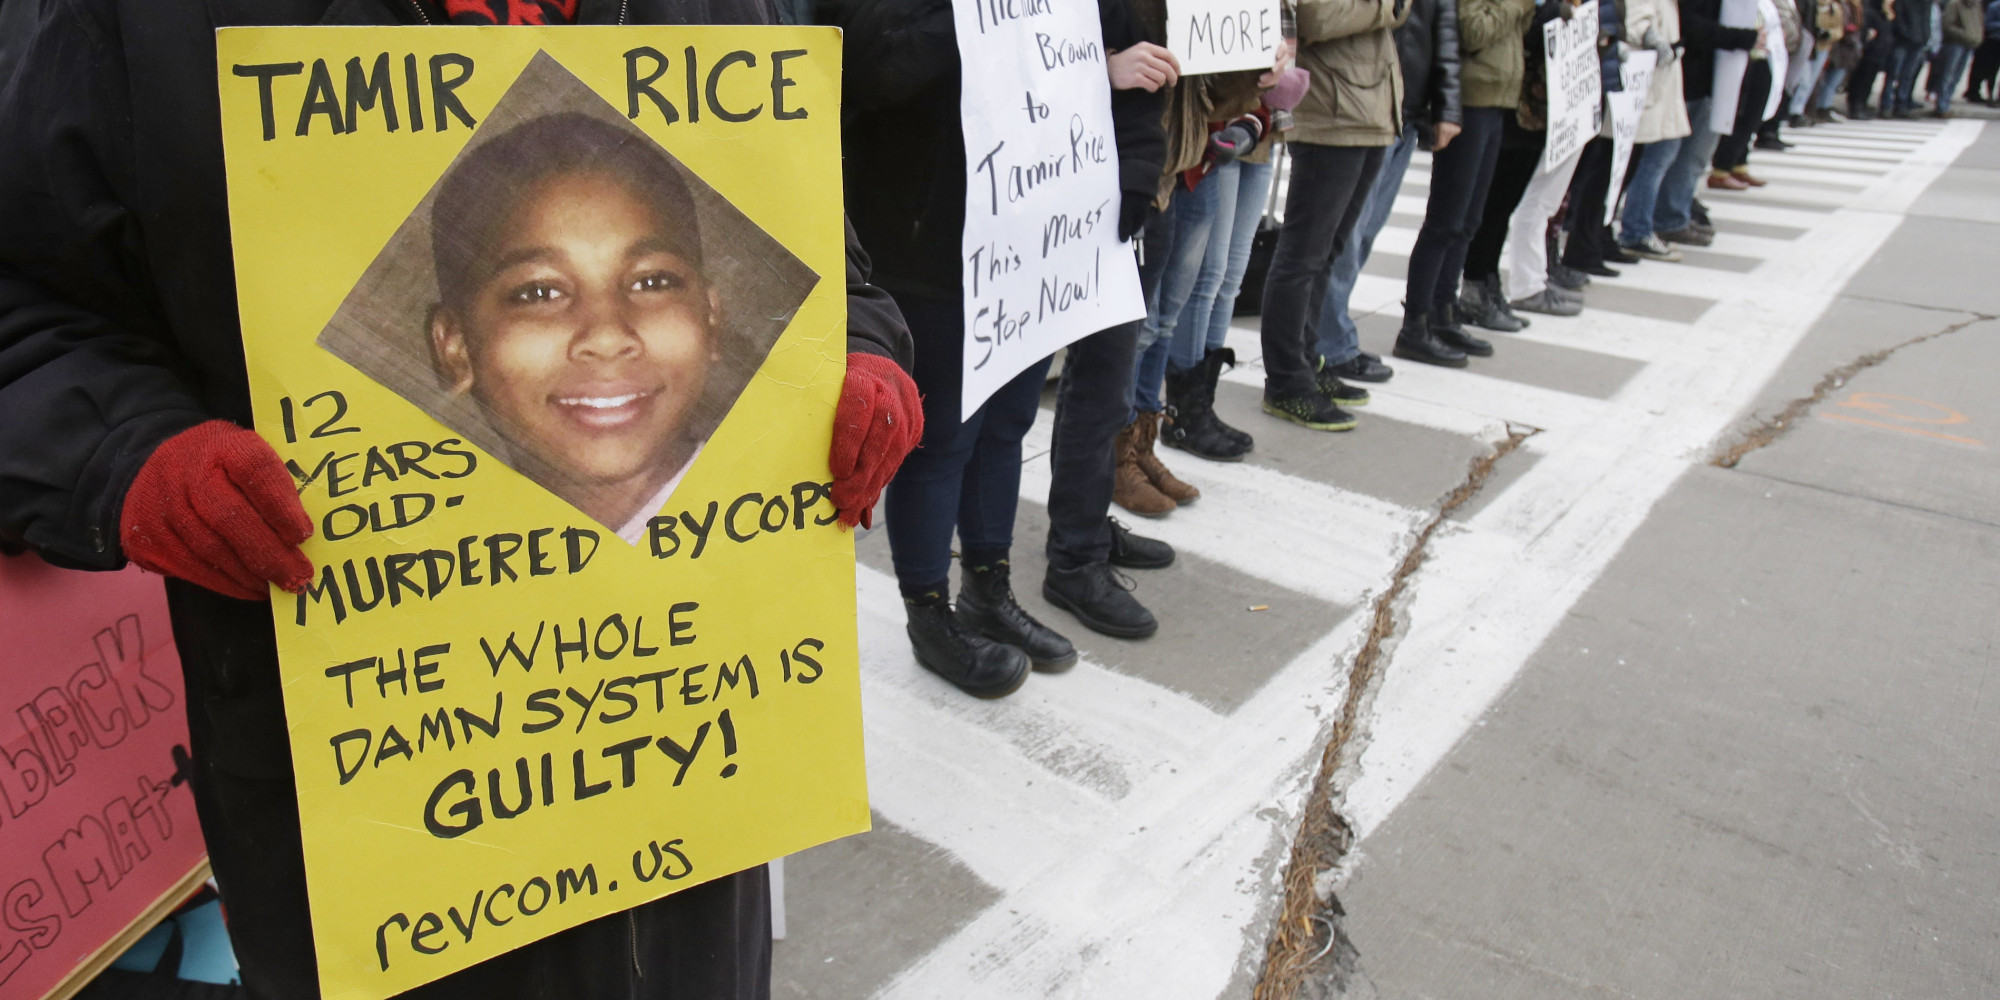 Don't Understand the Connection Between Tamir Rice's Killing and His